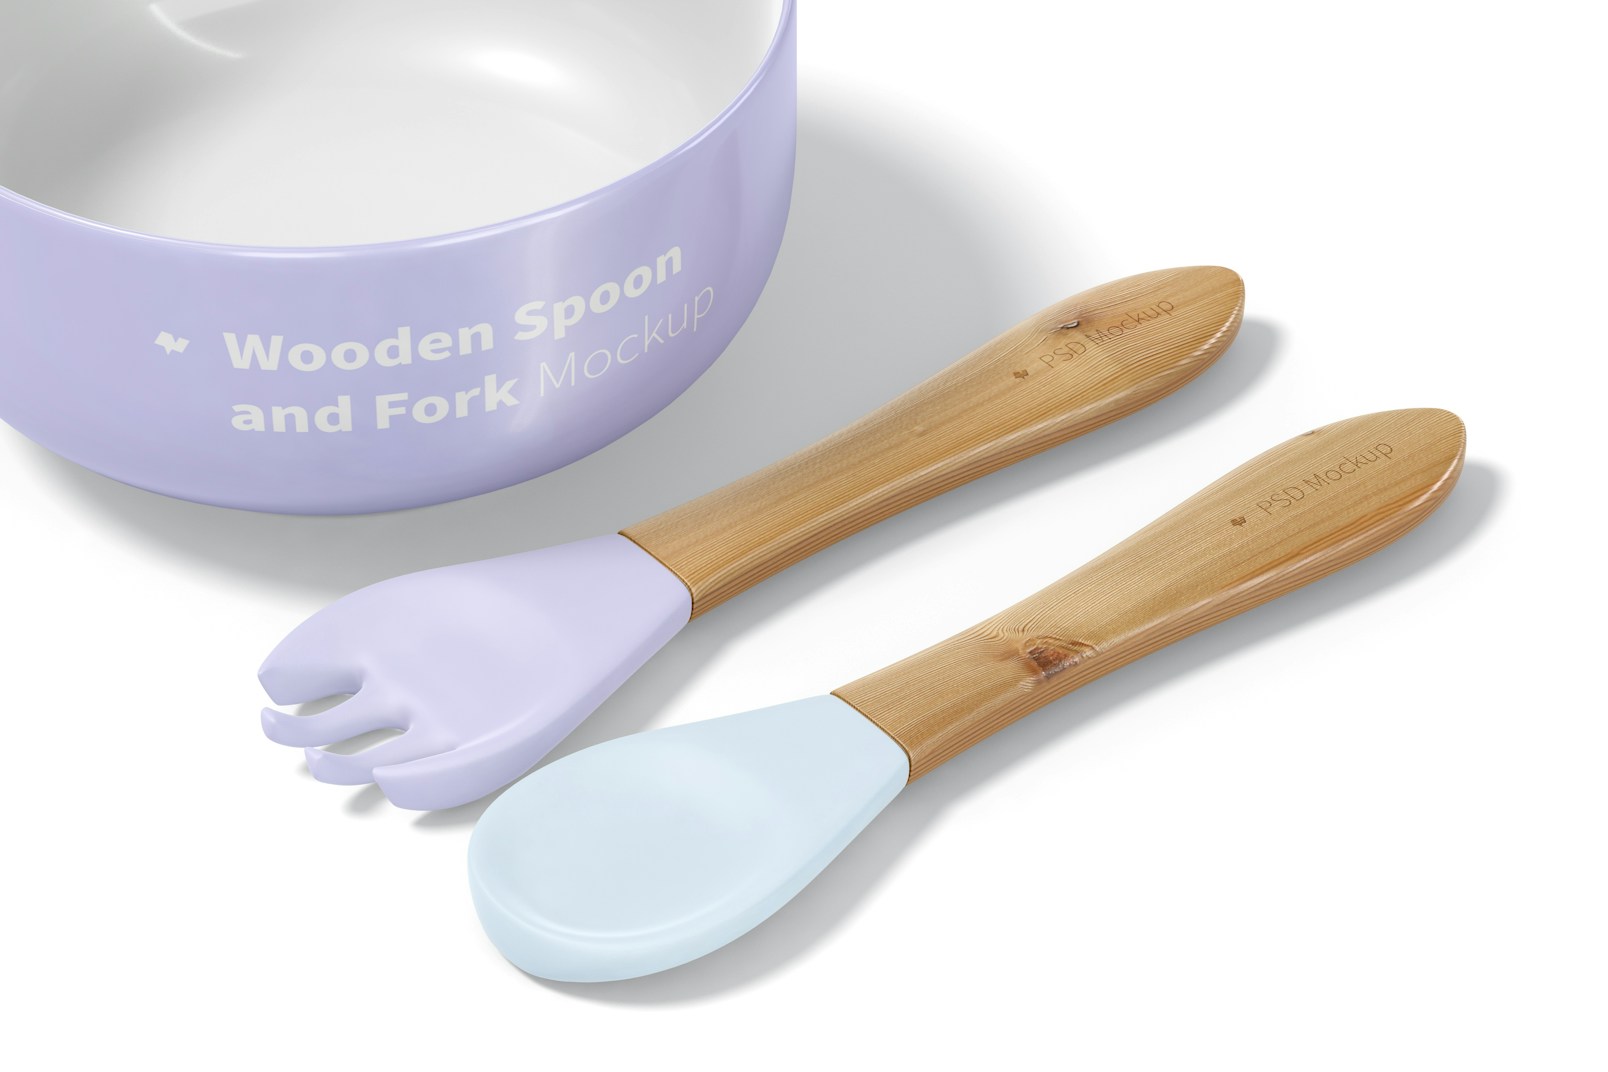 Wooden Spoon and Fork Mockup, Left View